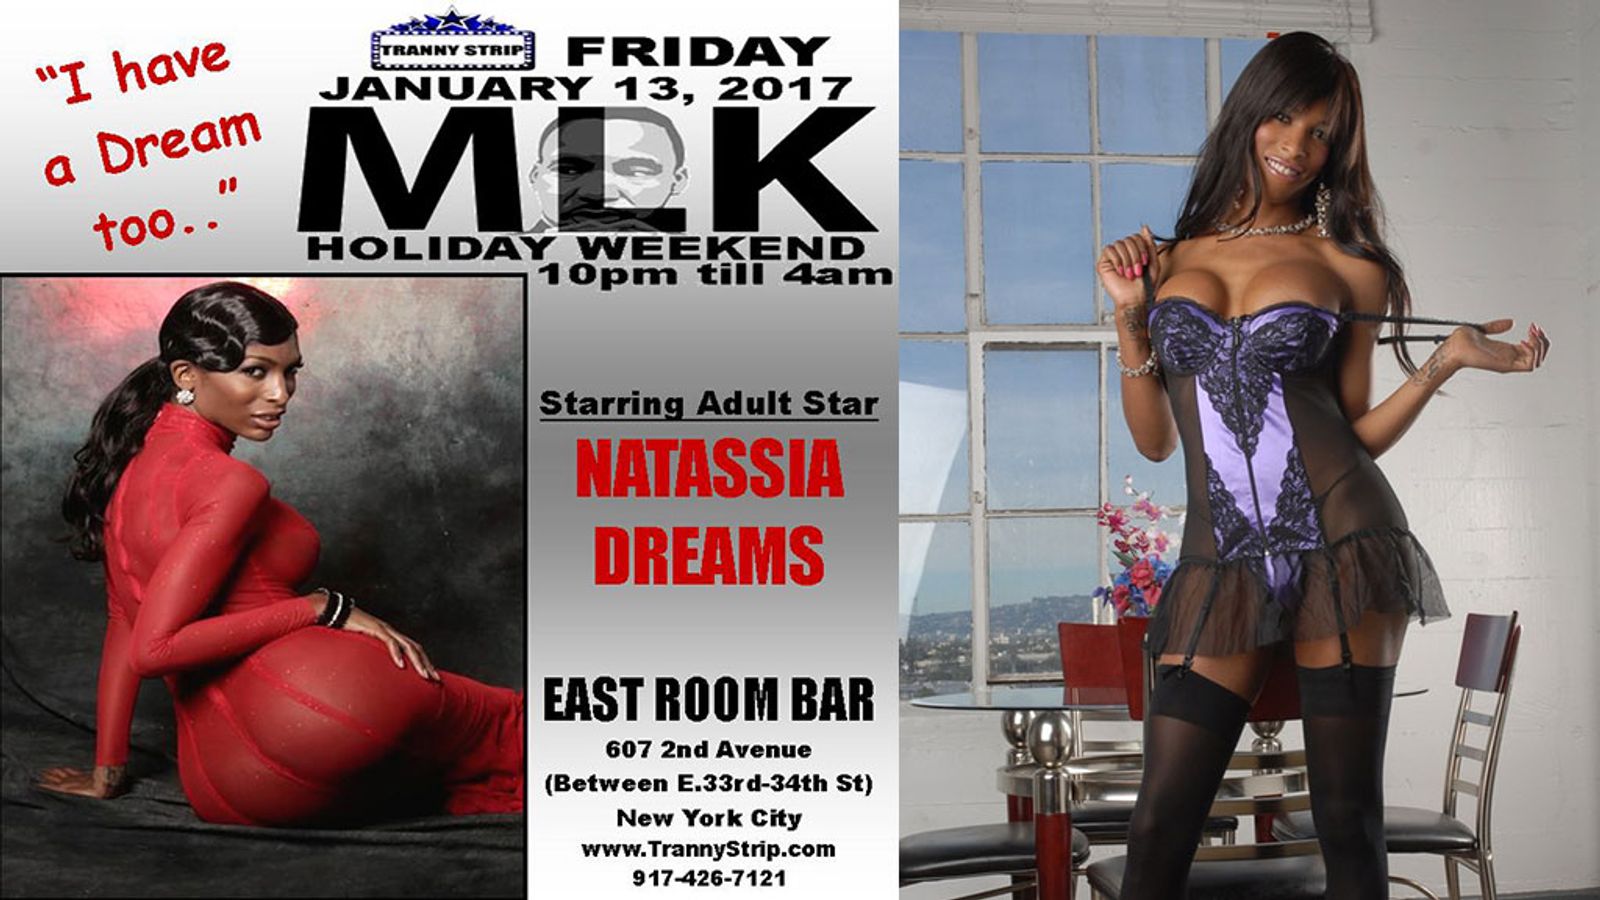 Natassia Dreams to Host Tranny Strip MLK Holiday Weekend Party